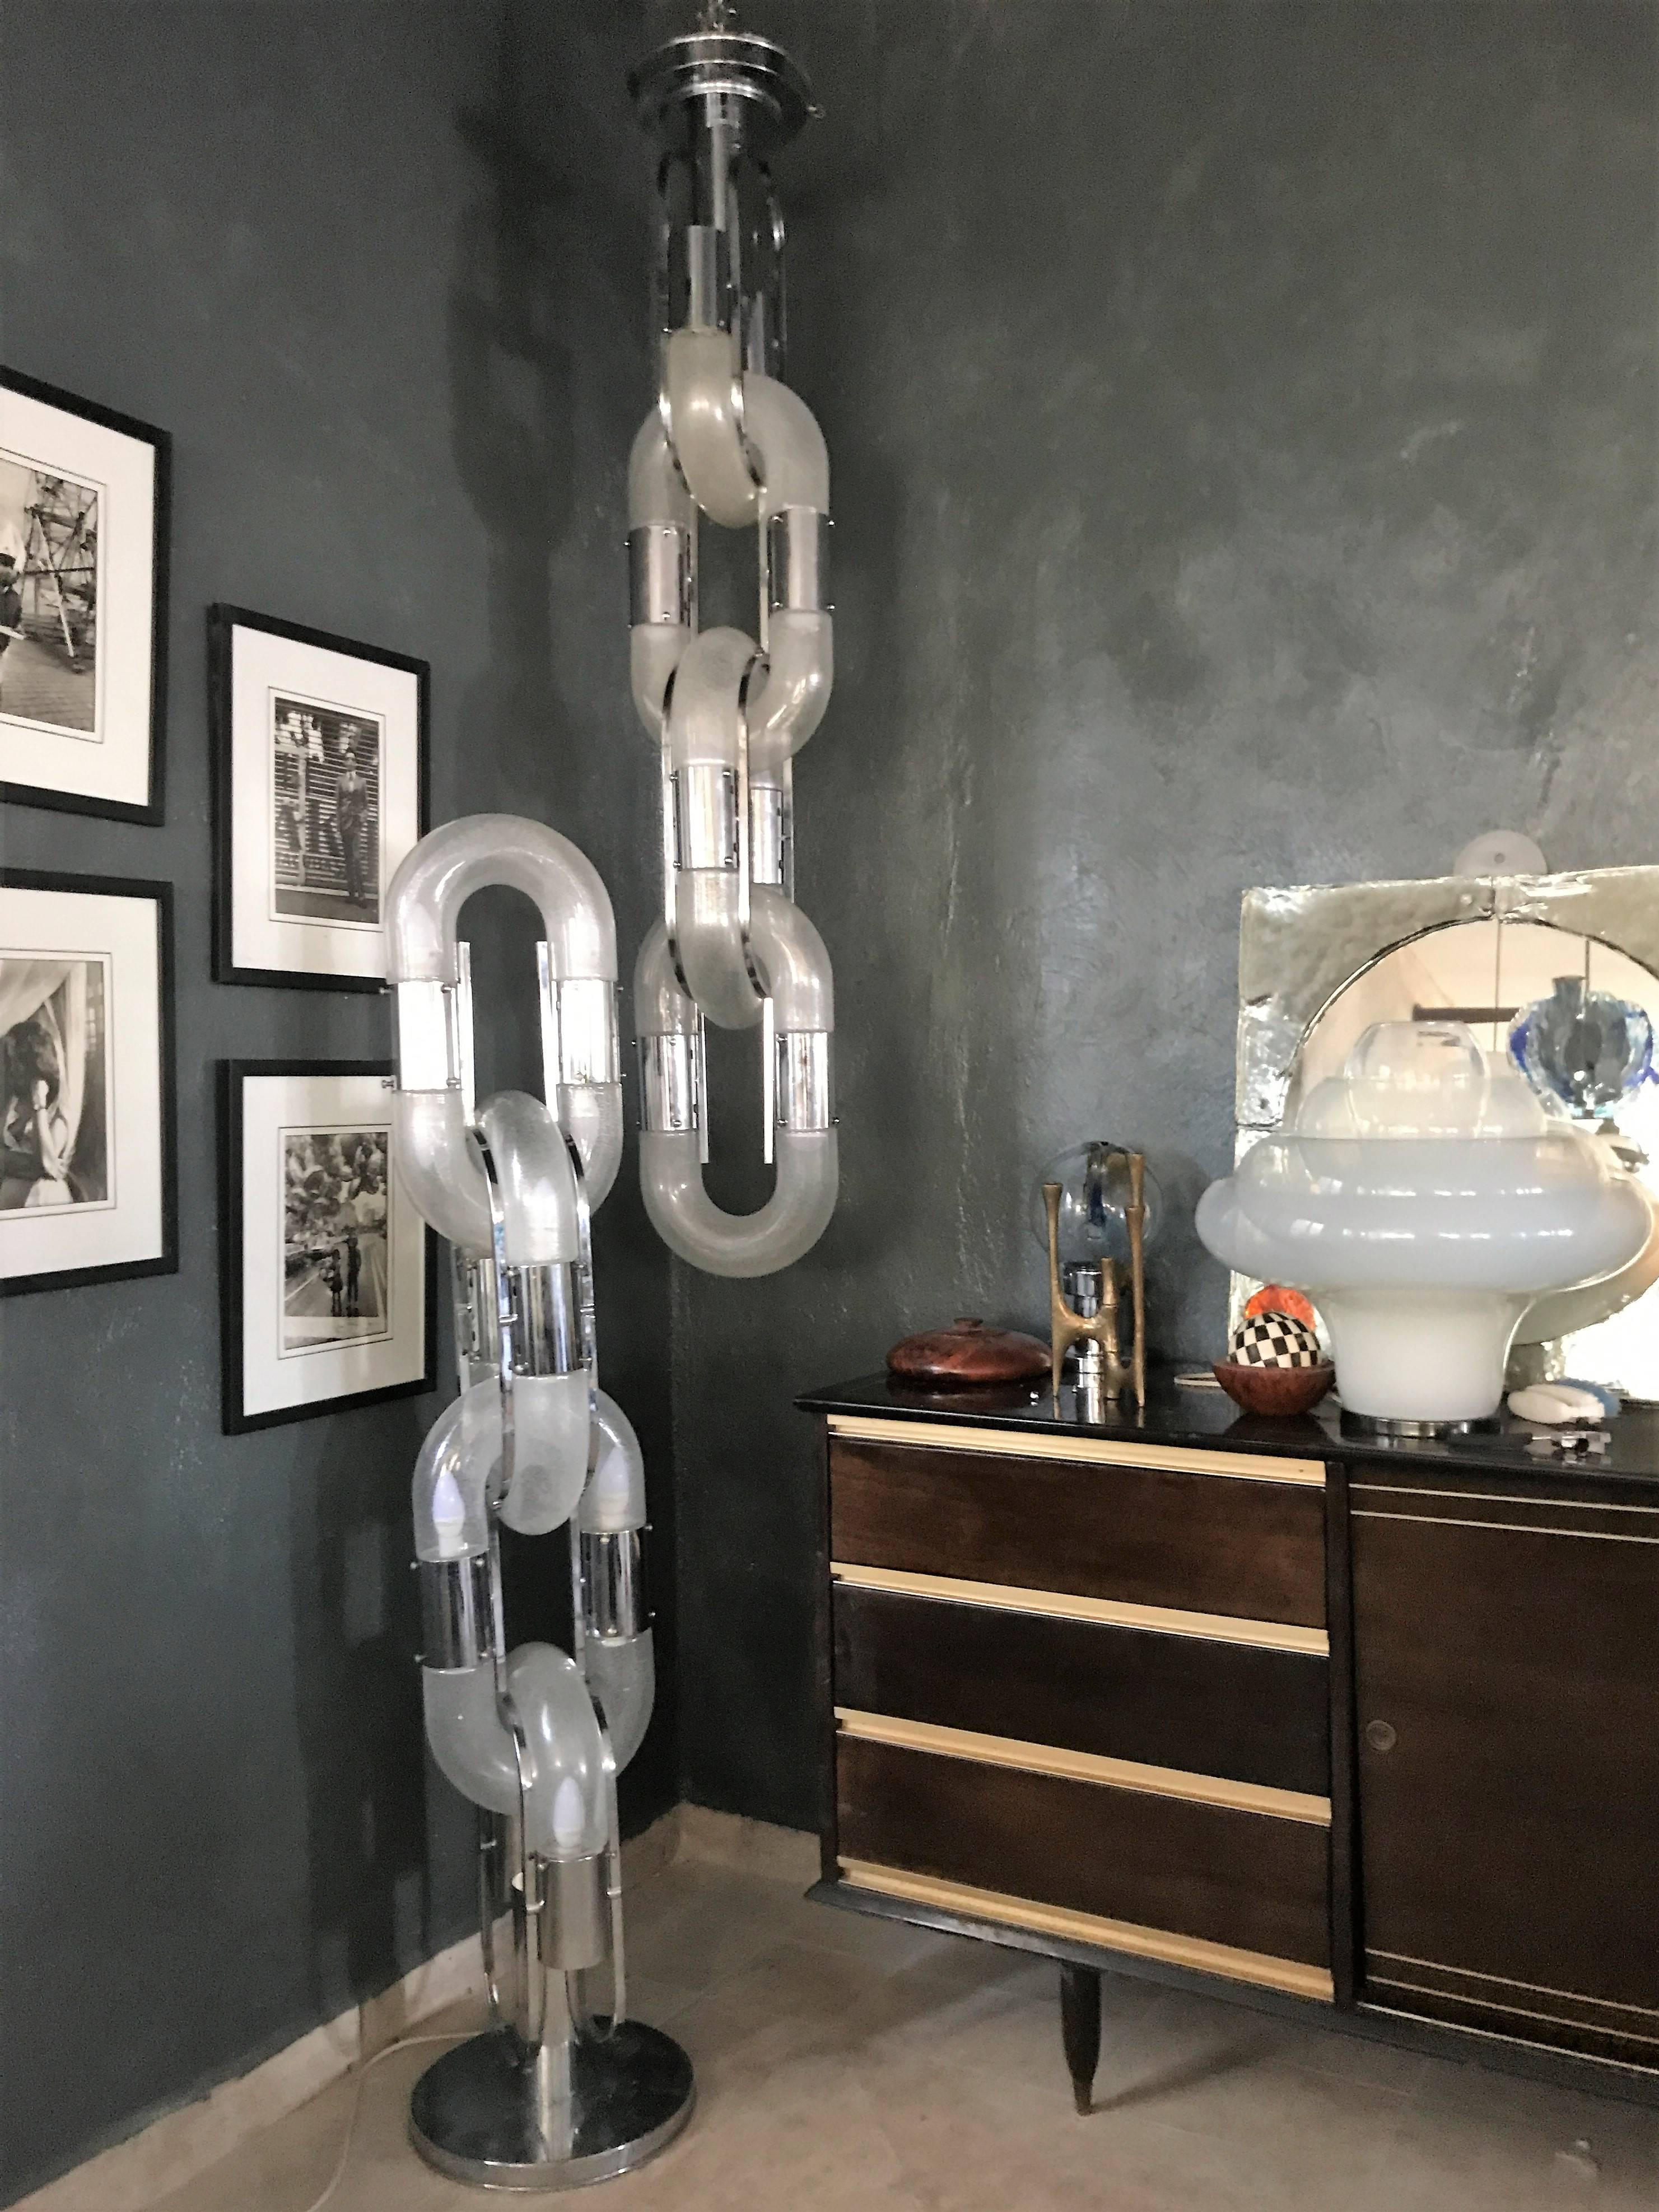 Floor lamp and chandelier designed by Aldo Nason for Mazzega.
Each consists of three and a half 'Links' comprising seven glass shades and 14 lights, the chrome is in excellent condition. 
The current configuration is the original but both are